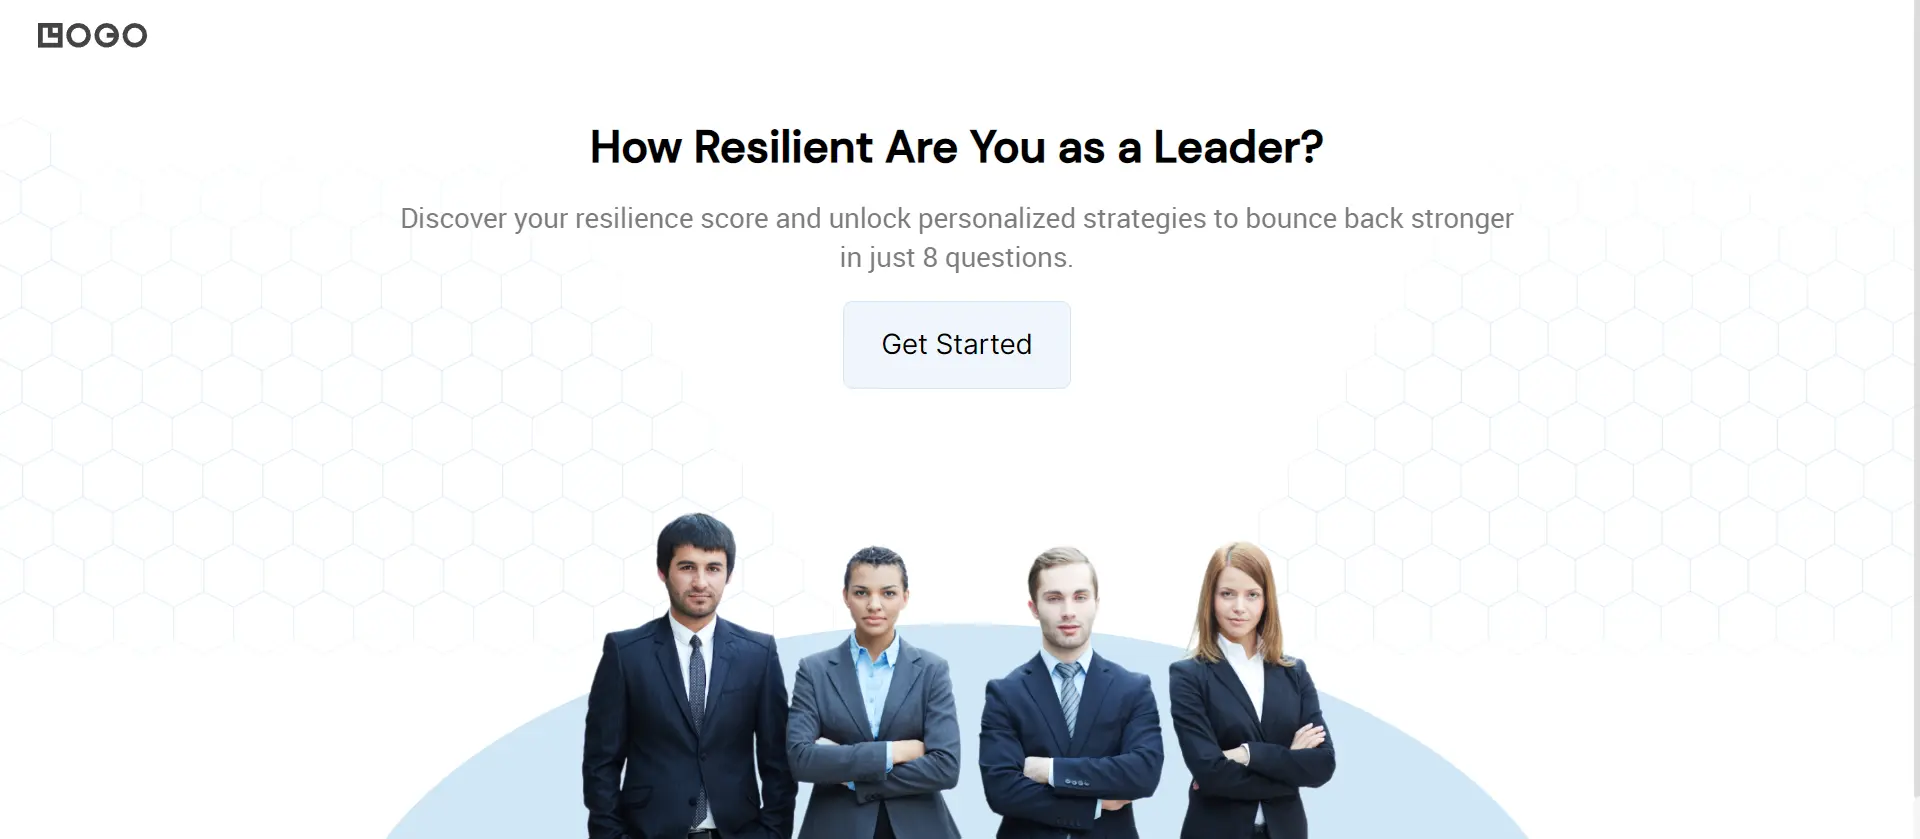 How Resilient Are You as a Leader (1)